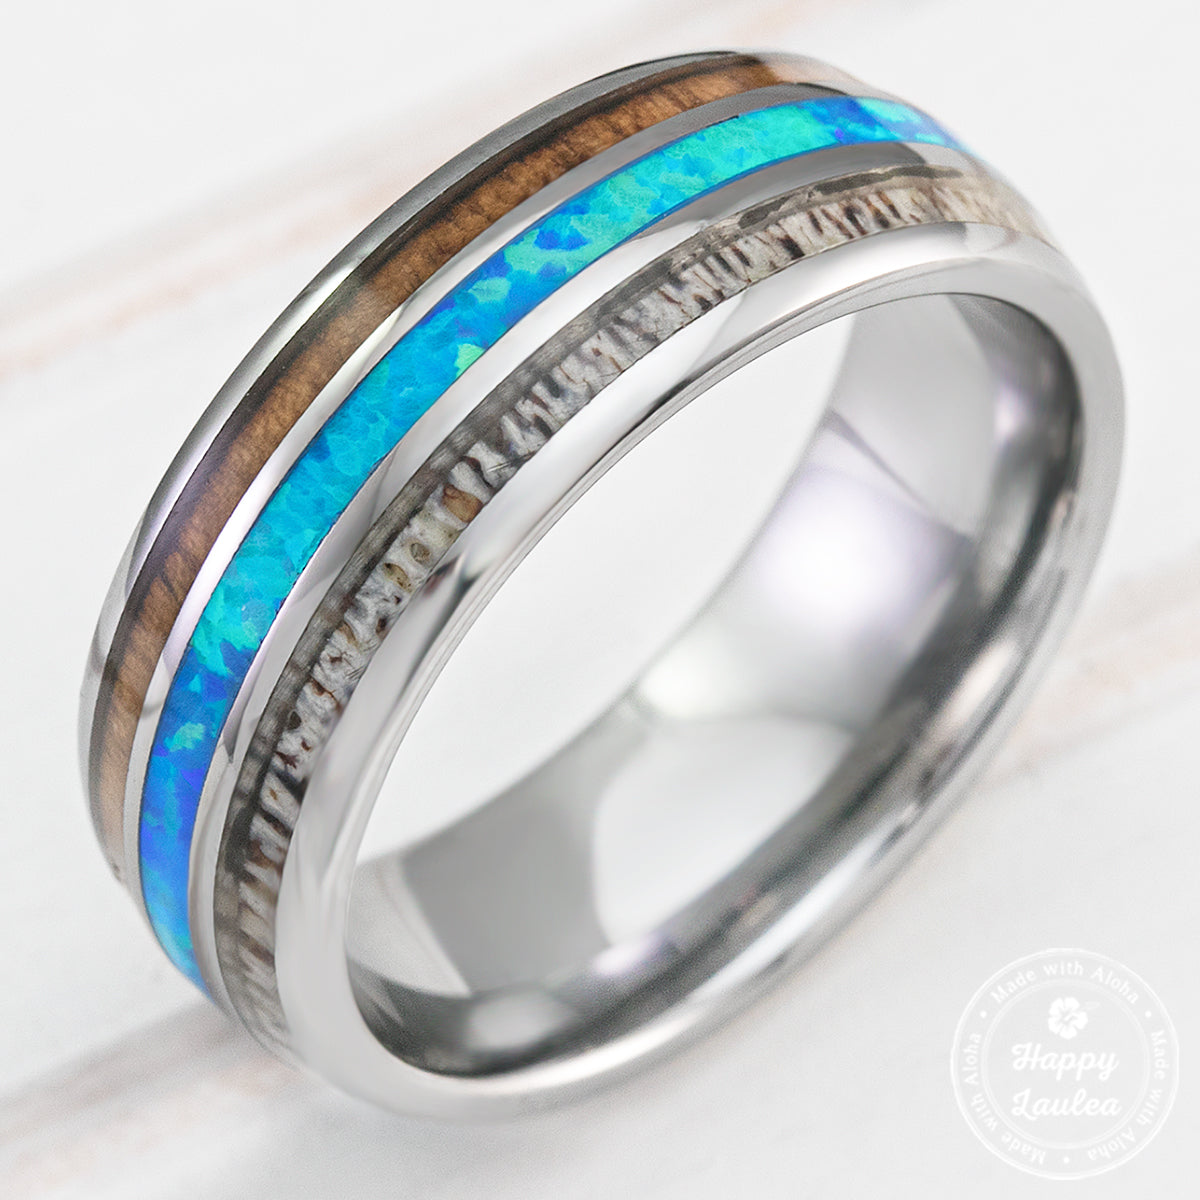 Tungsten Carbide Ring with Koa Wood, Blue Opal & Antler Tri Inlay - 8mm, Dome Shape, Comfort Fitment